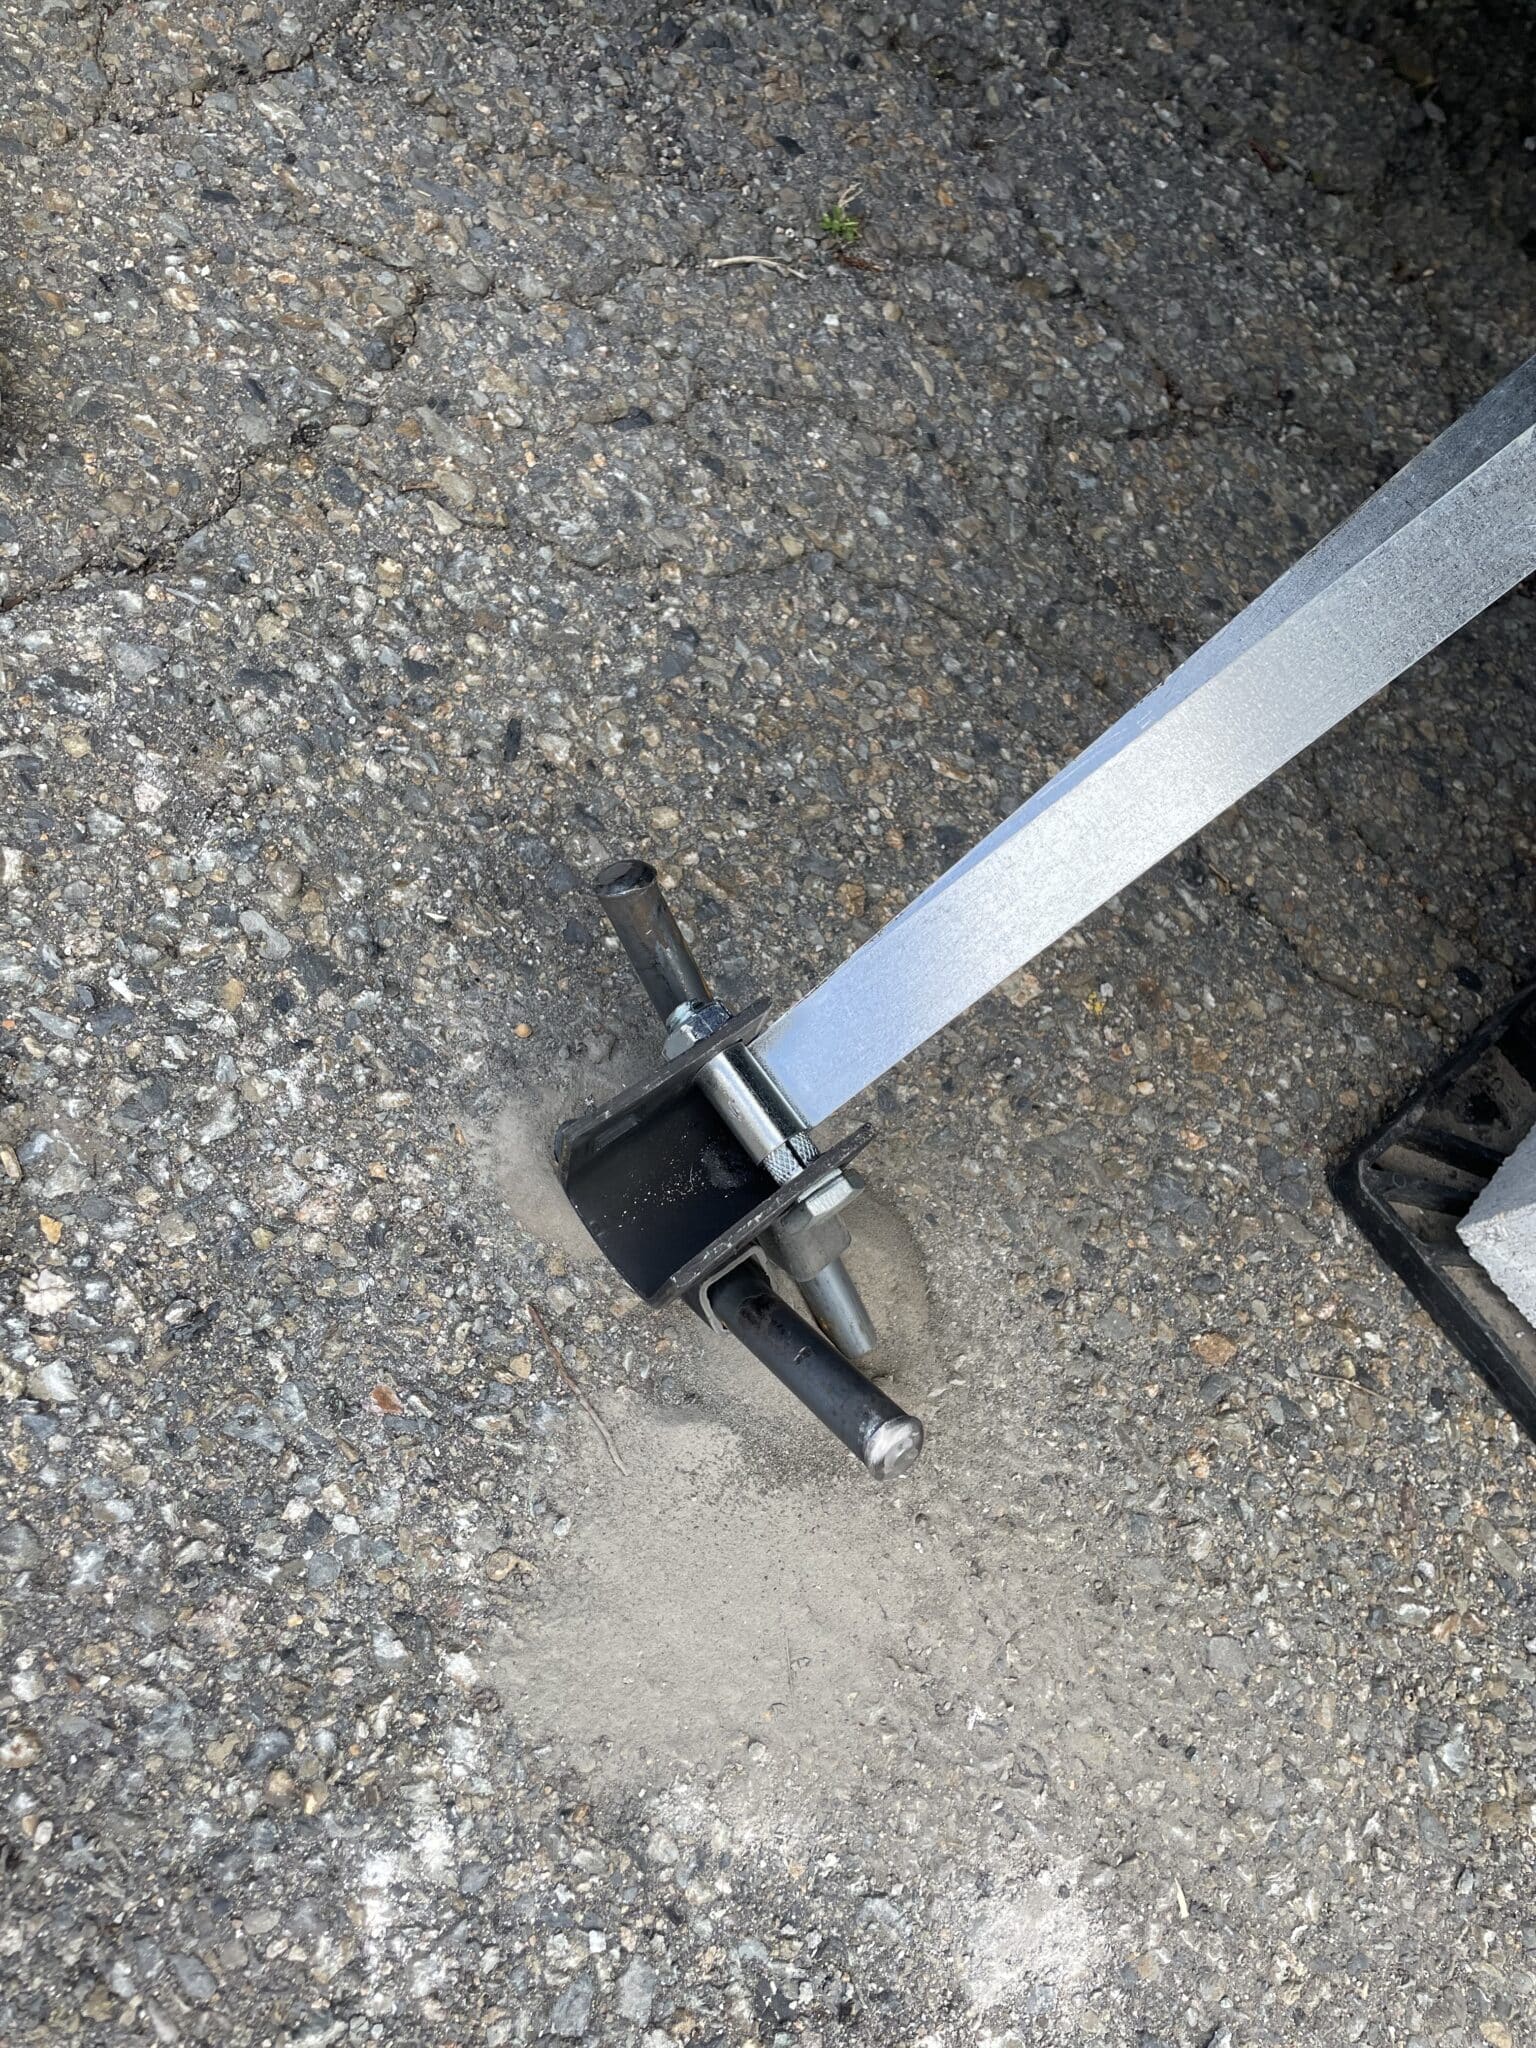 An image of a cross drive anchor with a tie-down strap.